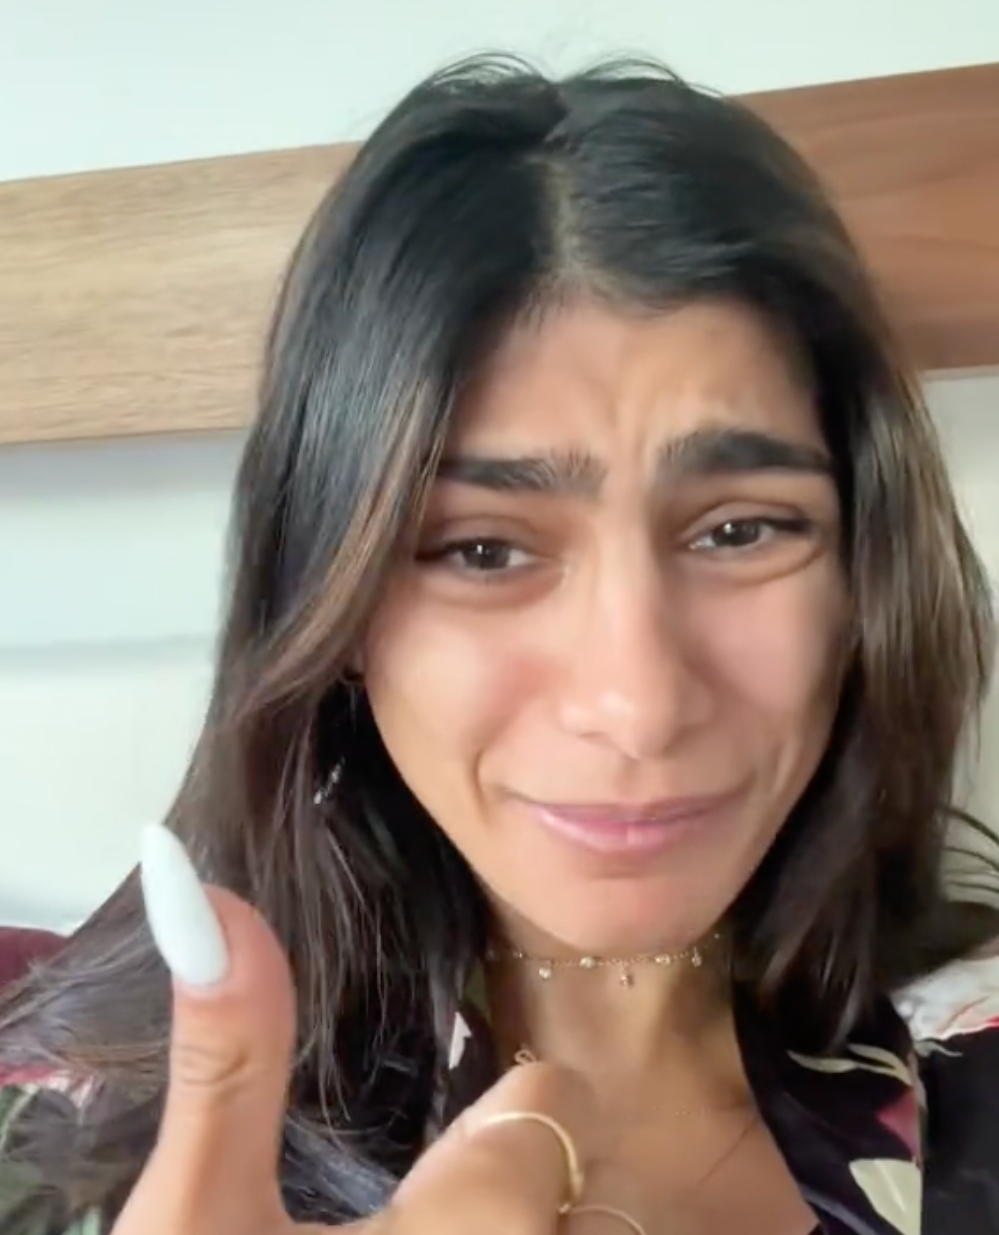 Influencer Mia Khalifa responds after facing backlash against her  controversial marriage advice